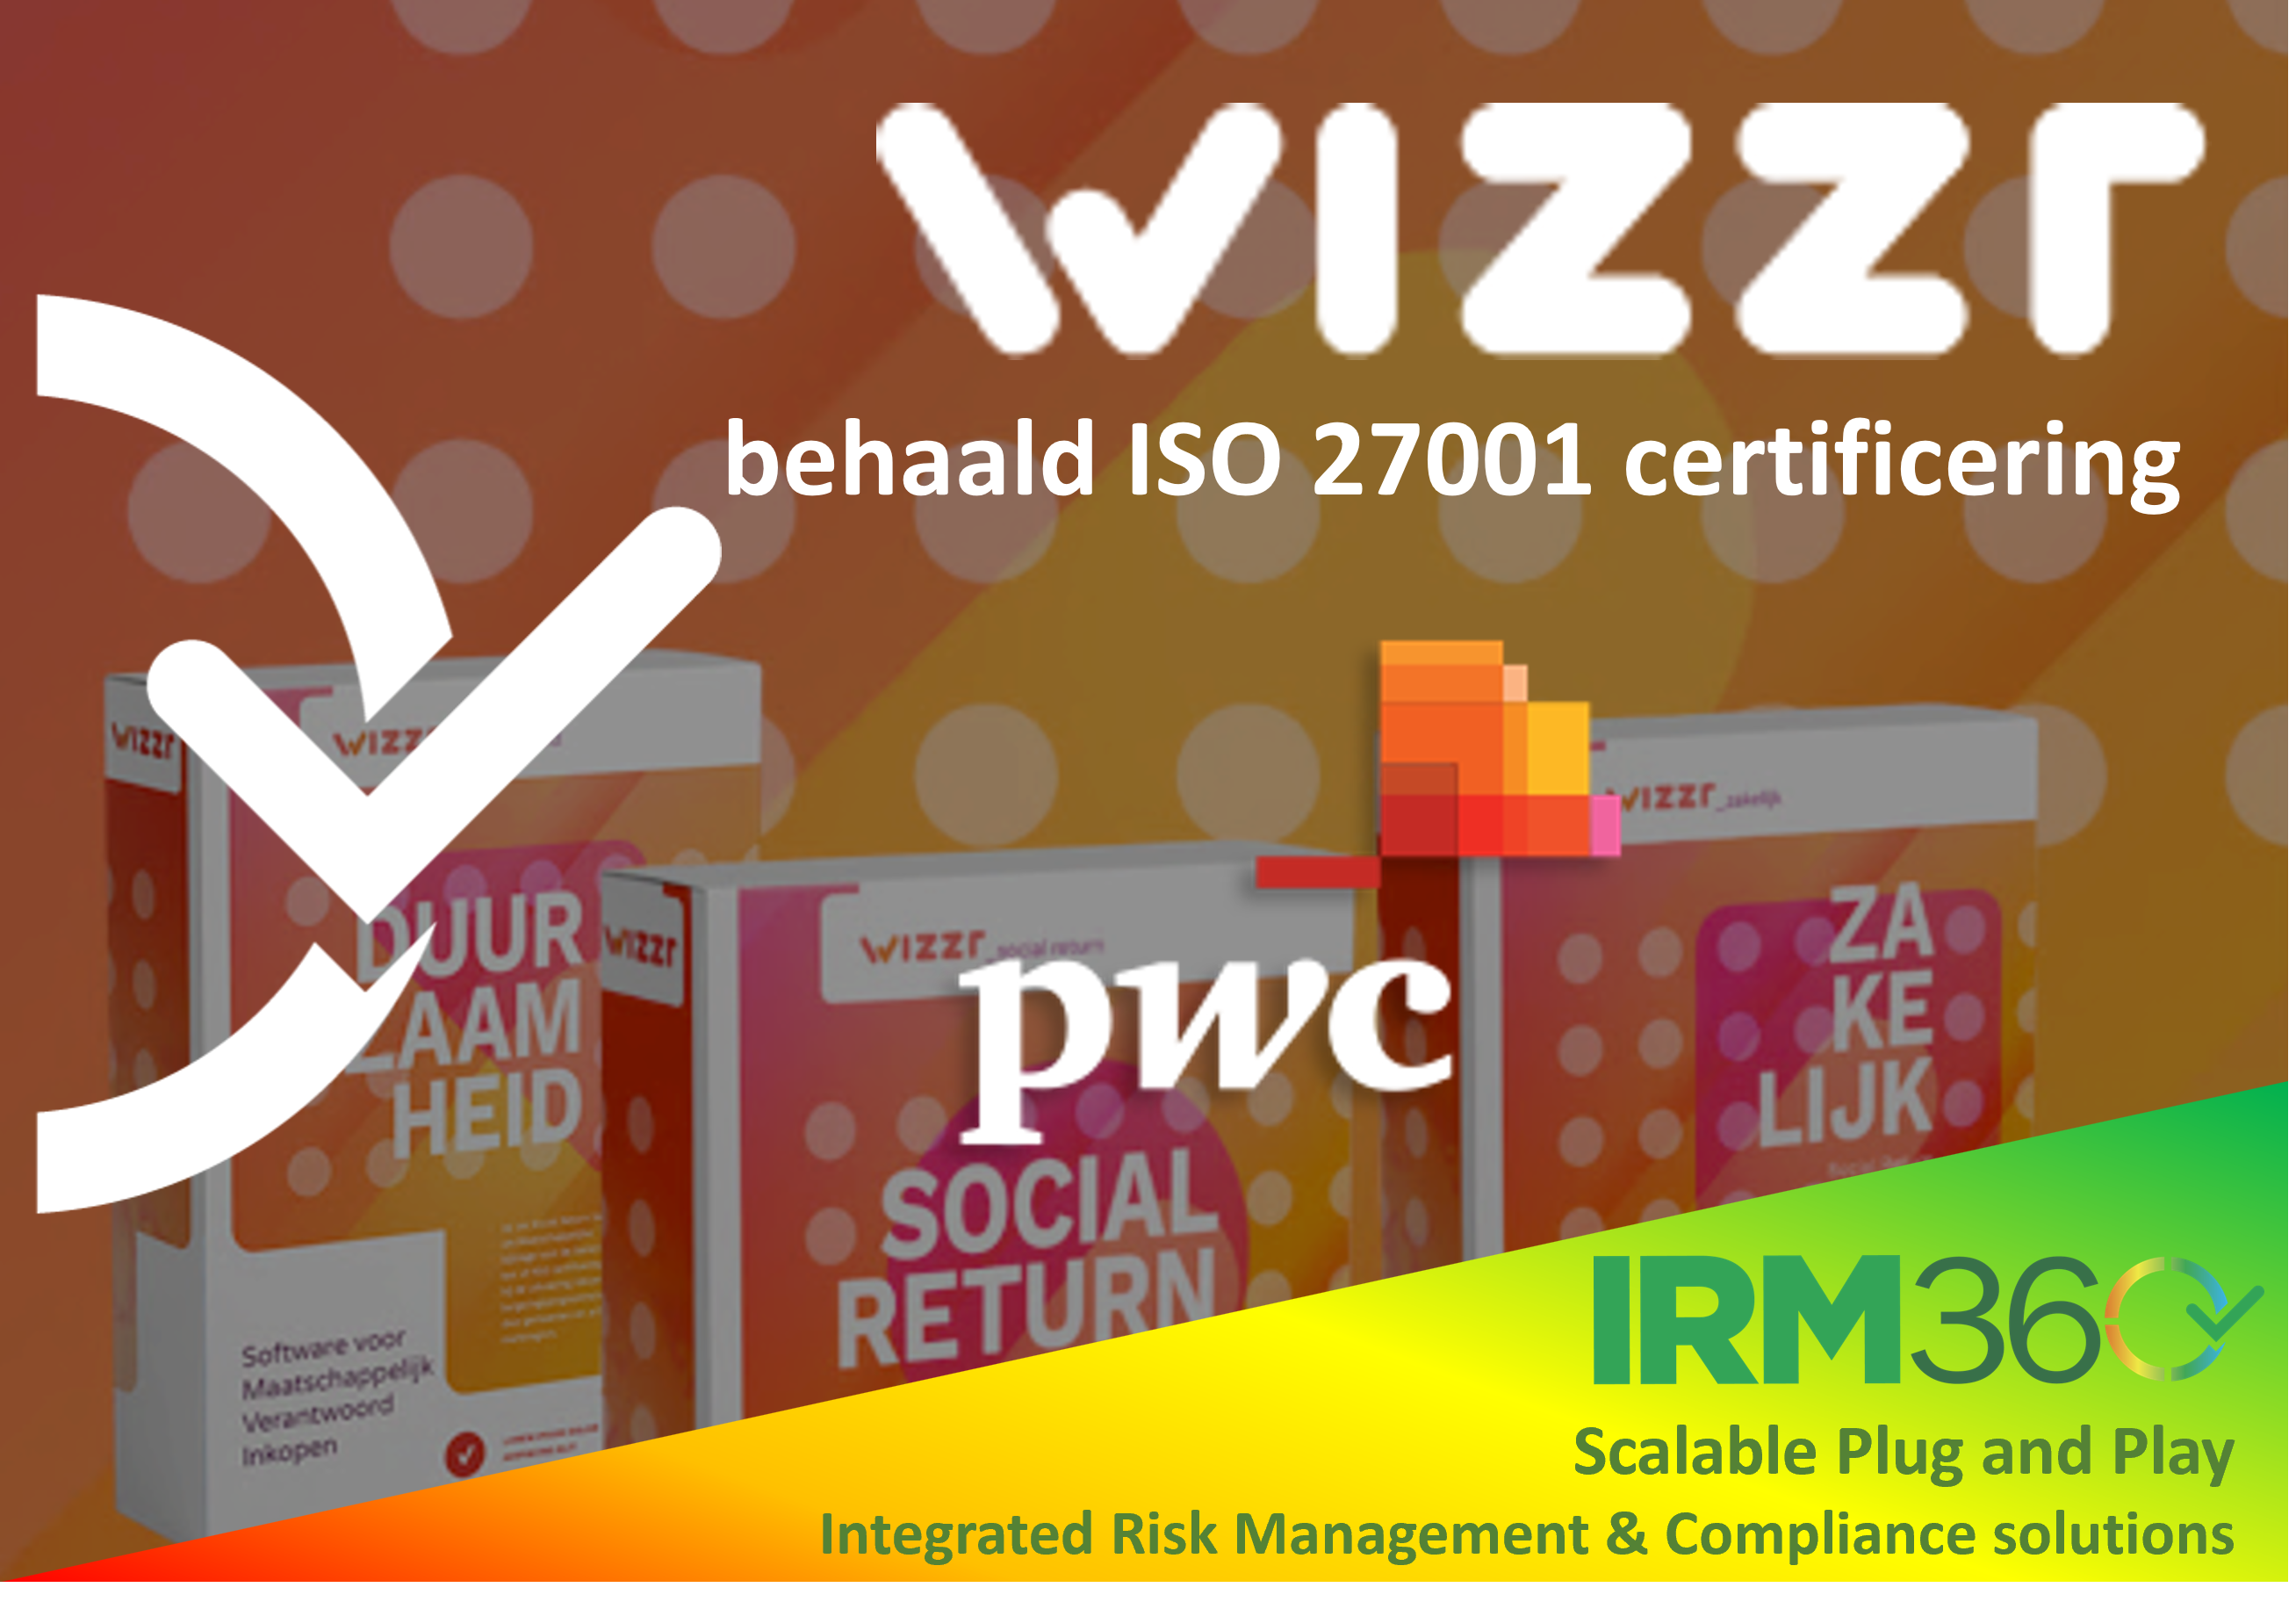 Wizzr achieves ISO 27001 certification